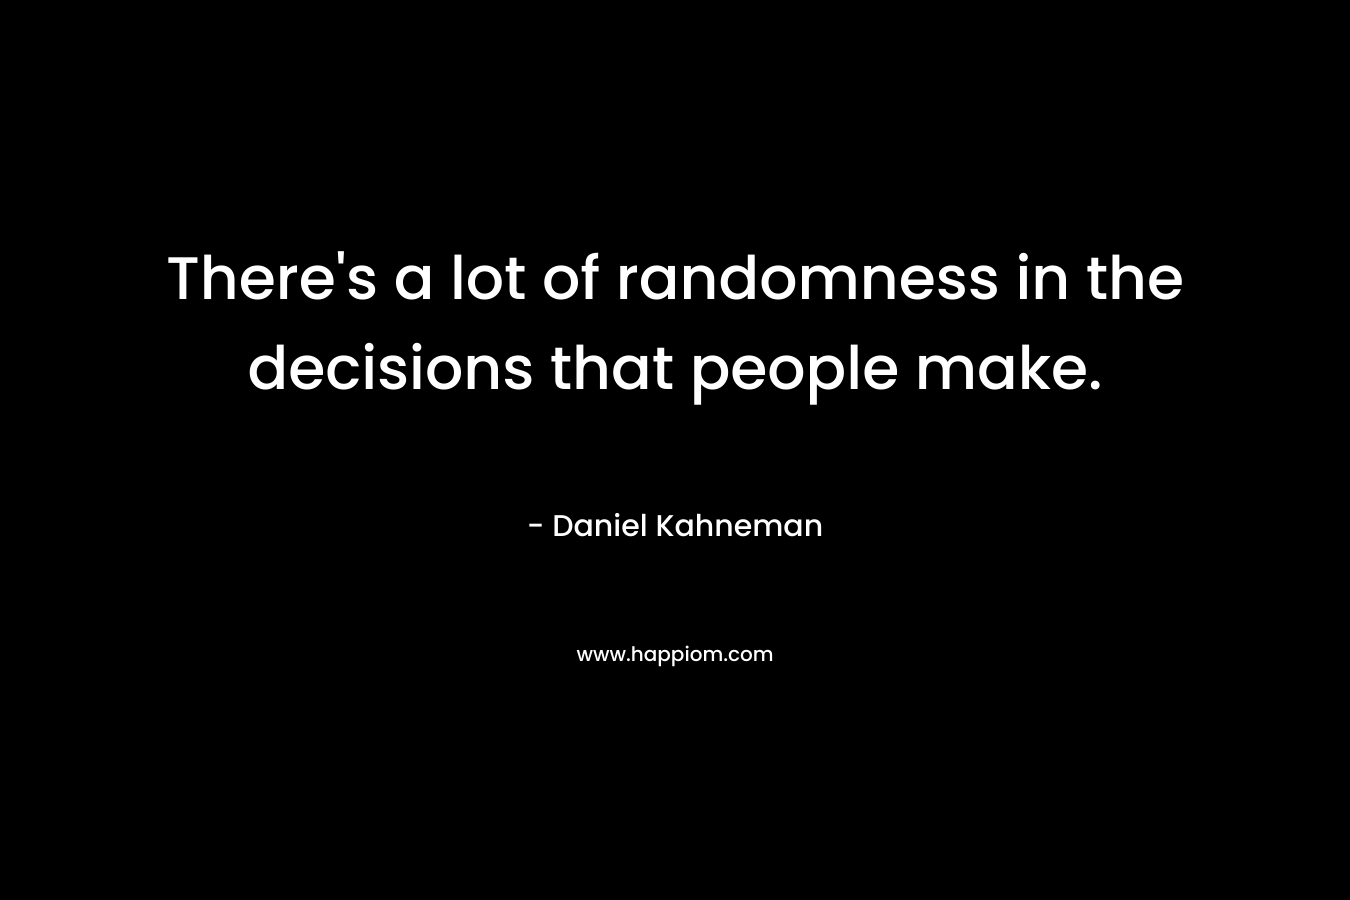 There’s a lot of randomness in the decisions that people make. – Daniel Kahneman